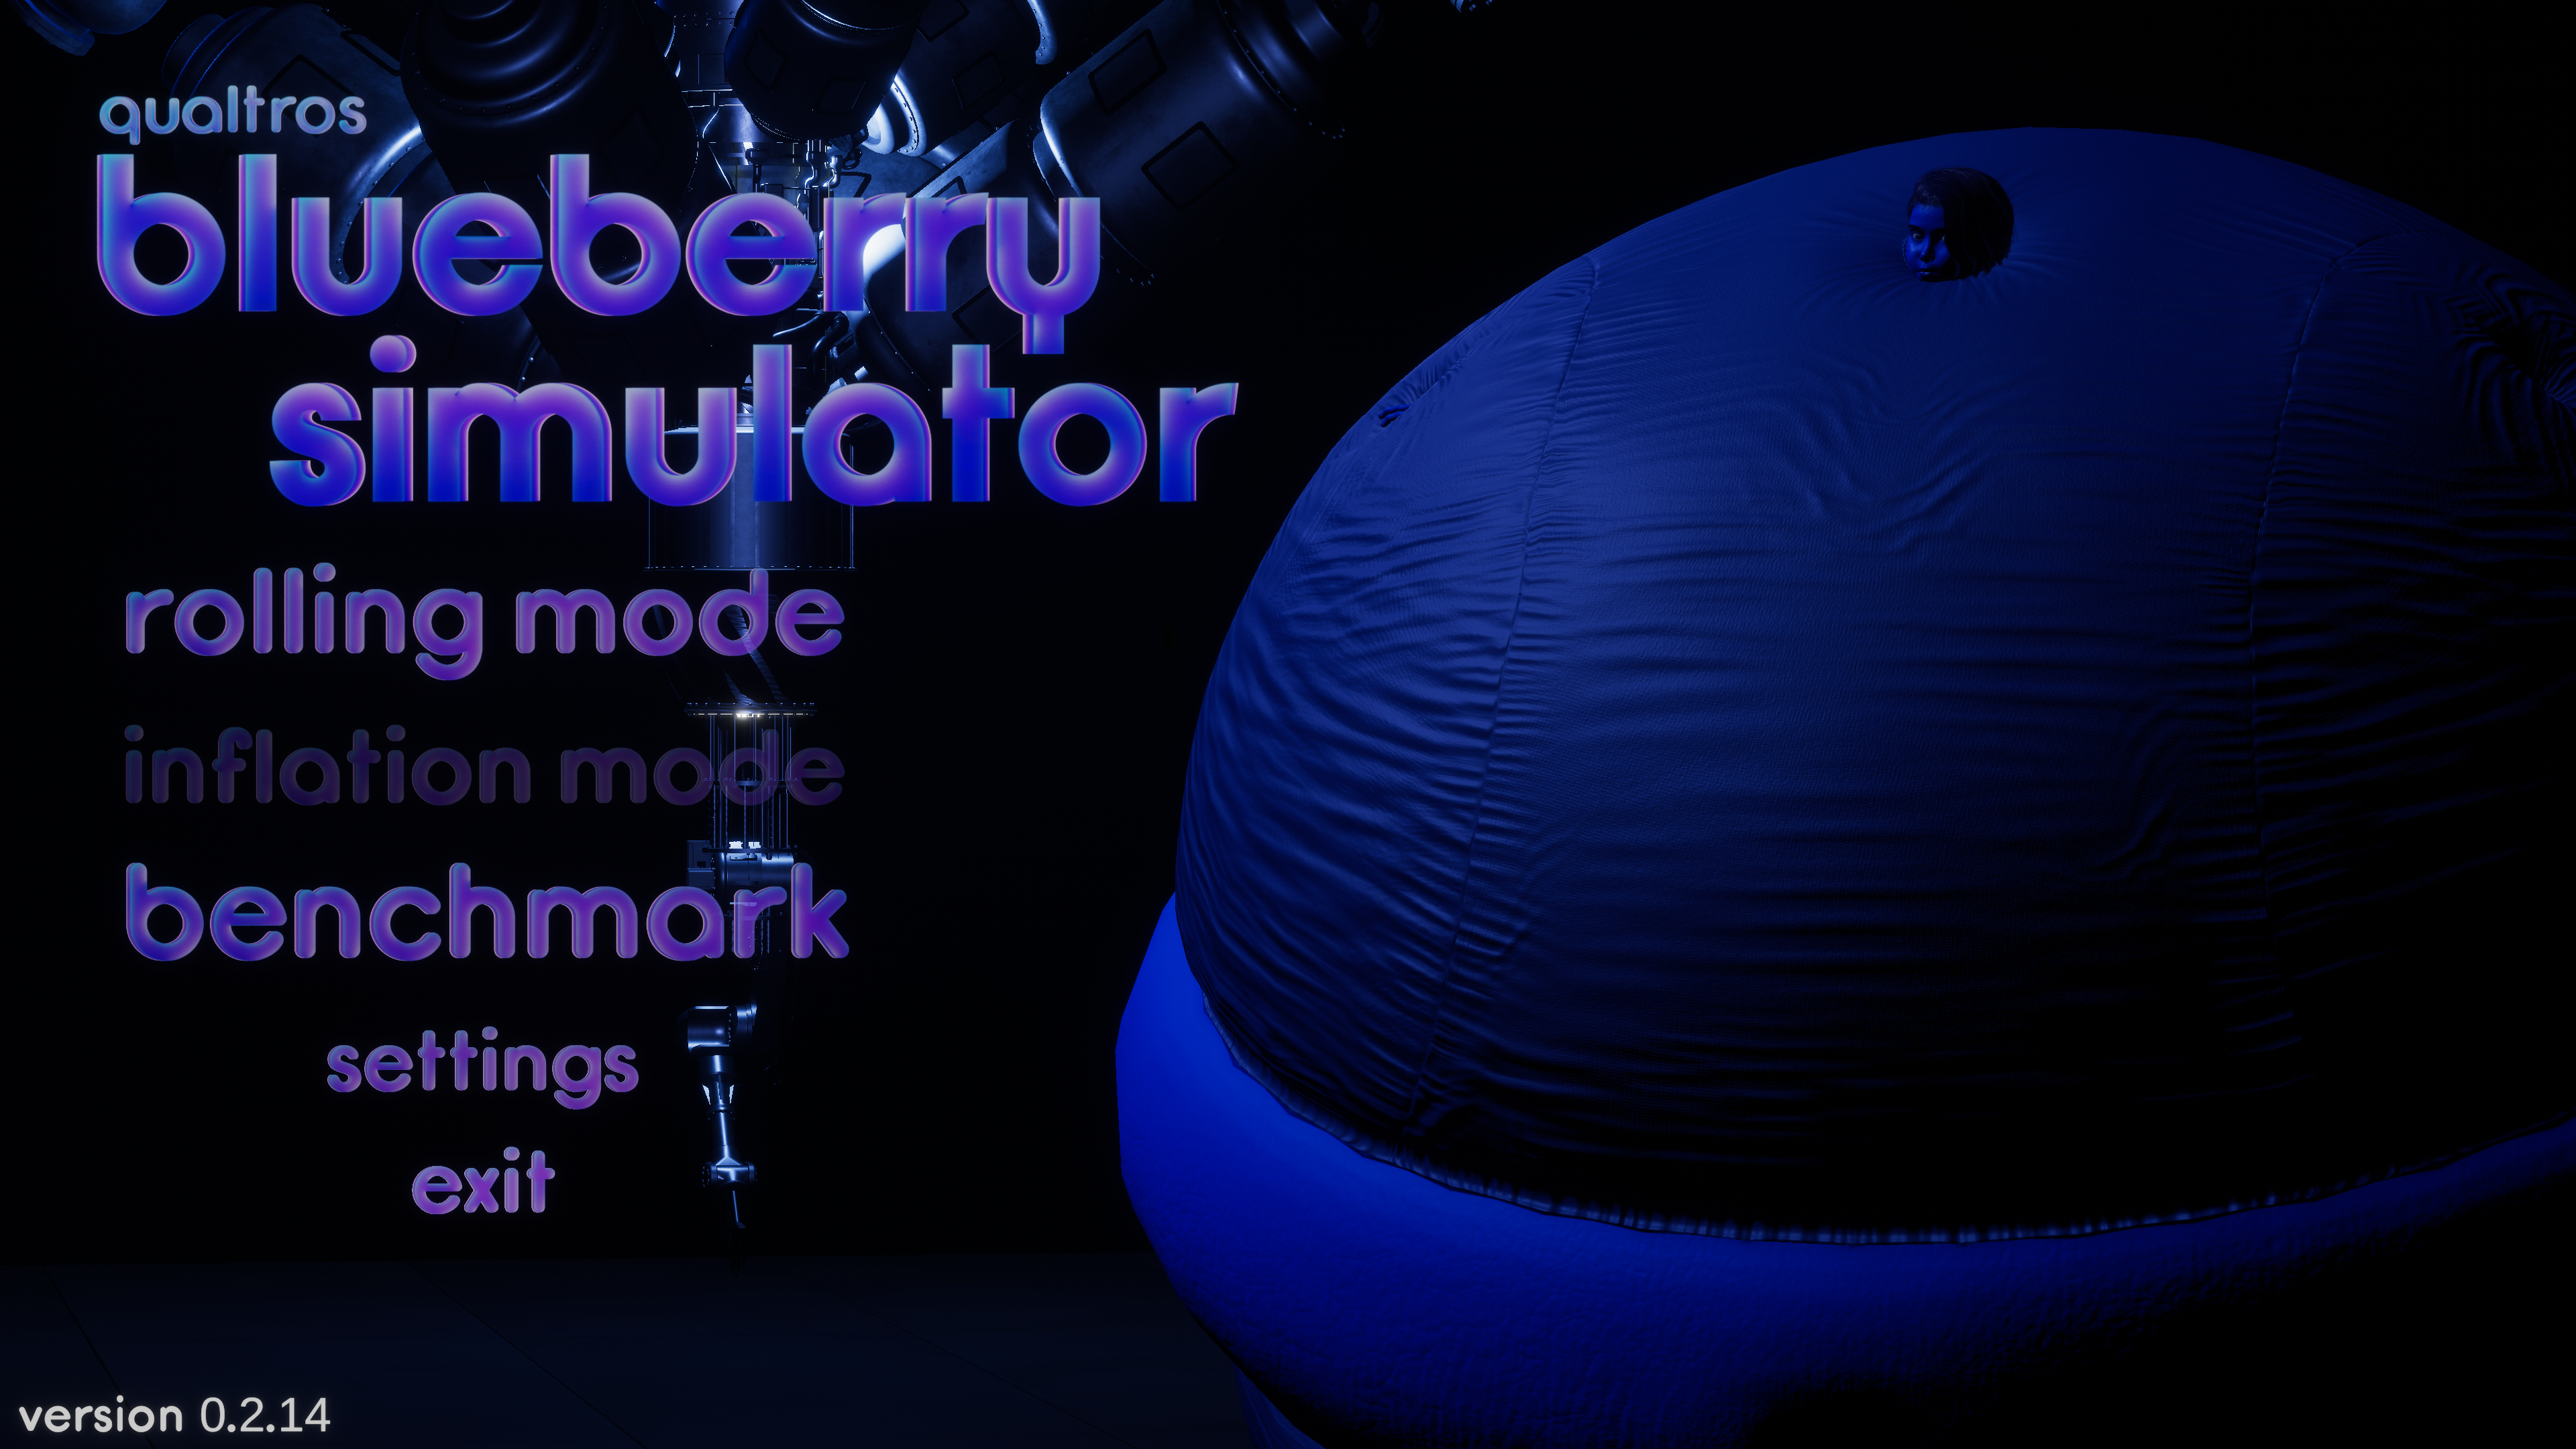 blueberryinflation